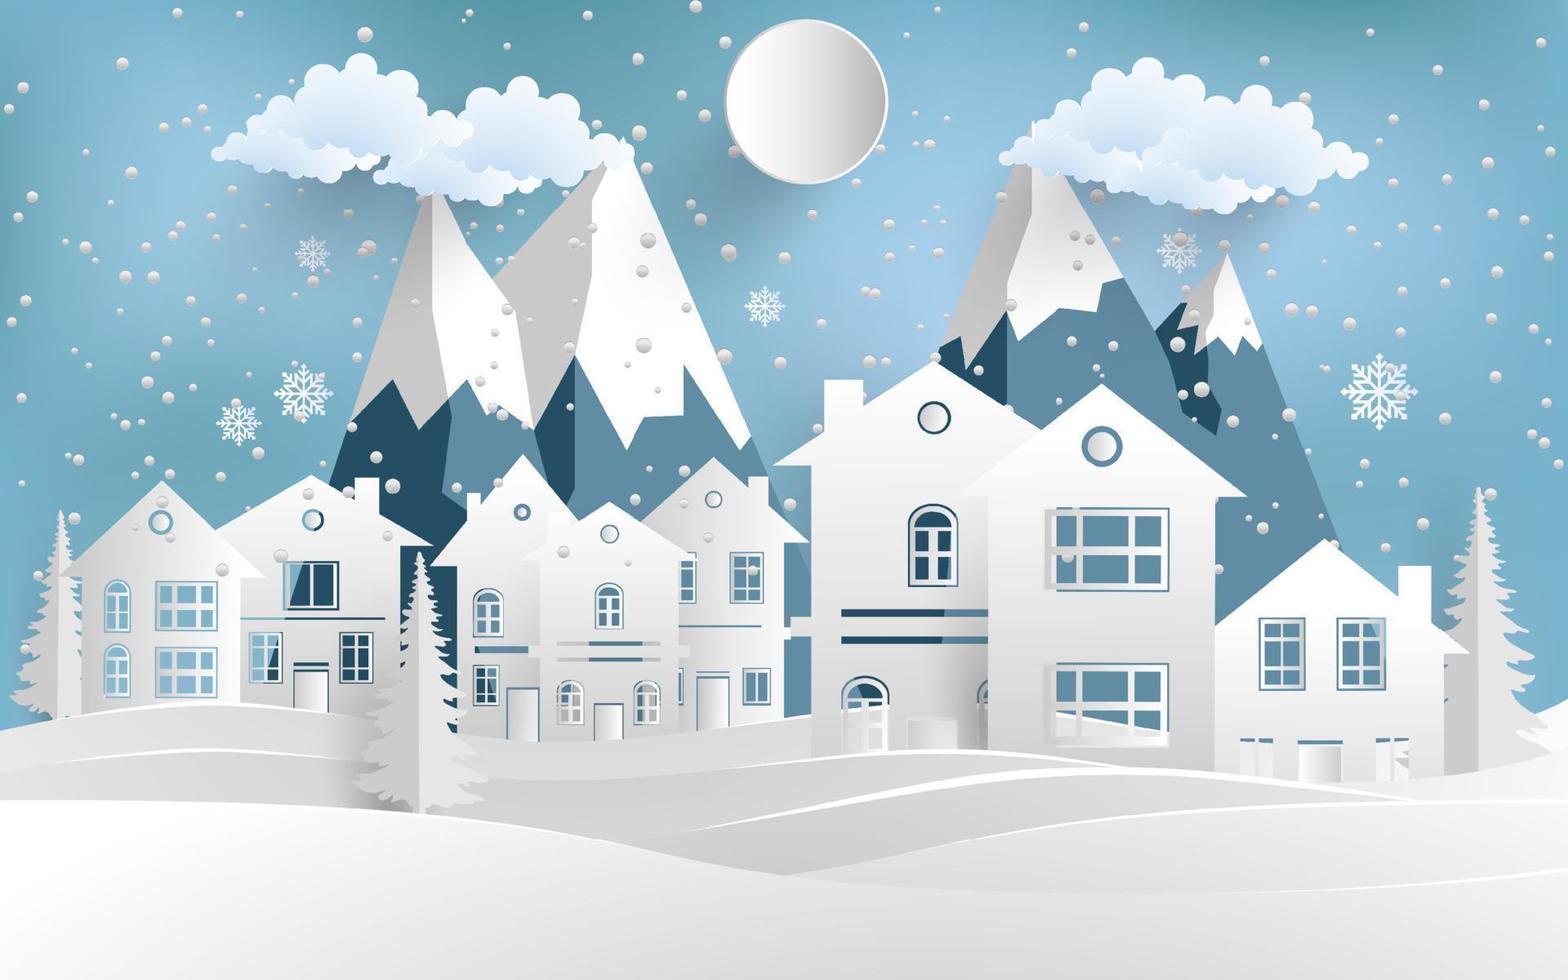 house in winter with mountains. paper cut design vector